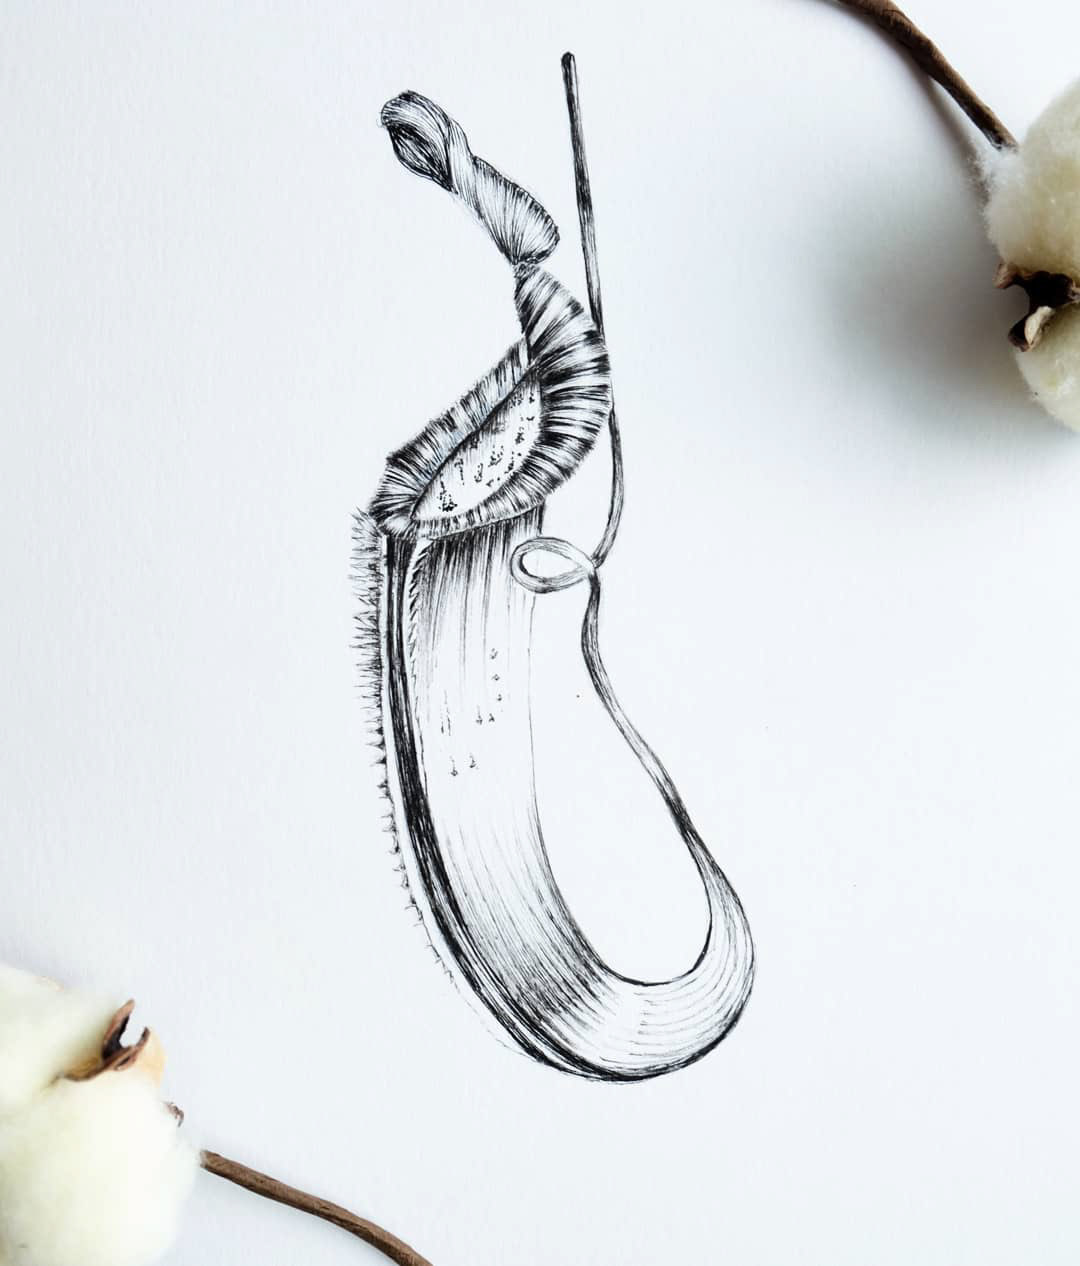 Illustration of a pitcher plant found in borneo, asia